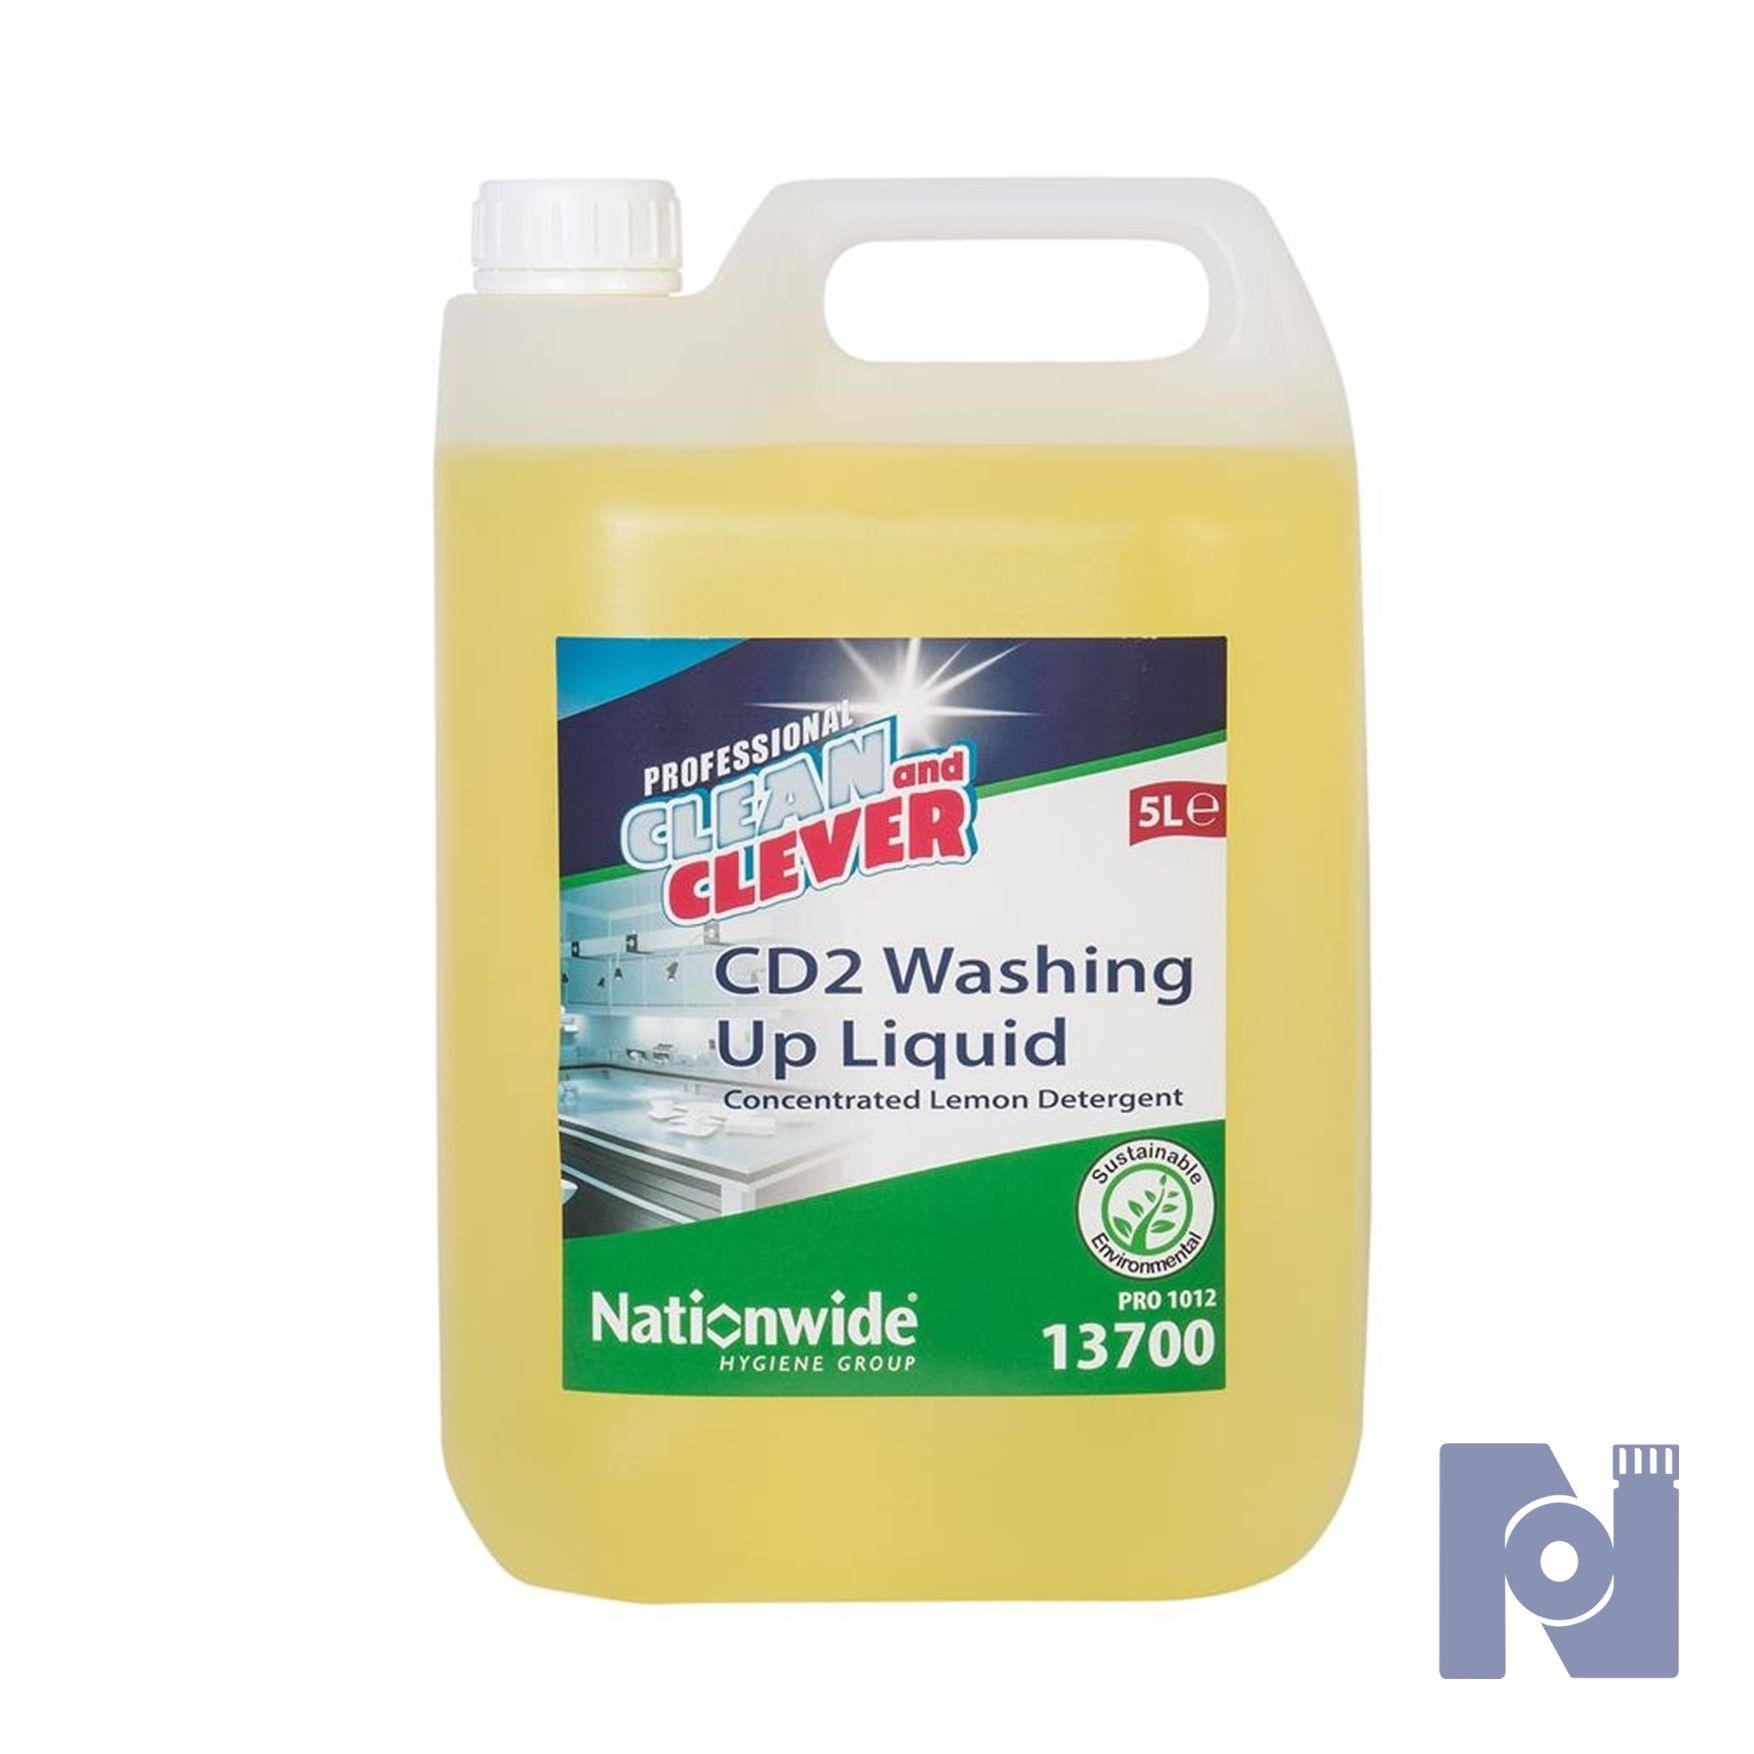 Clean & Clever CD2 Washing Up Liquid